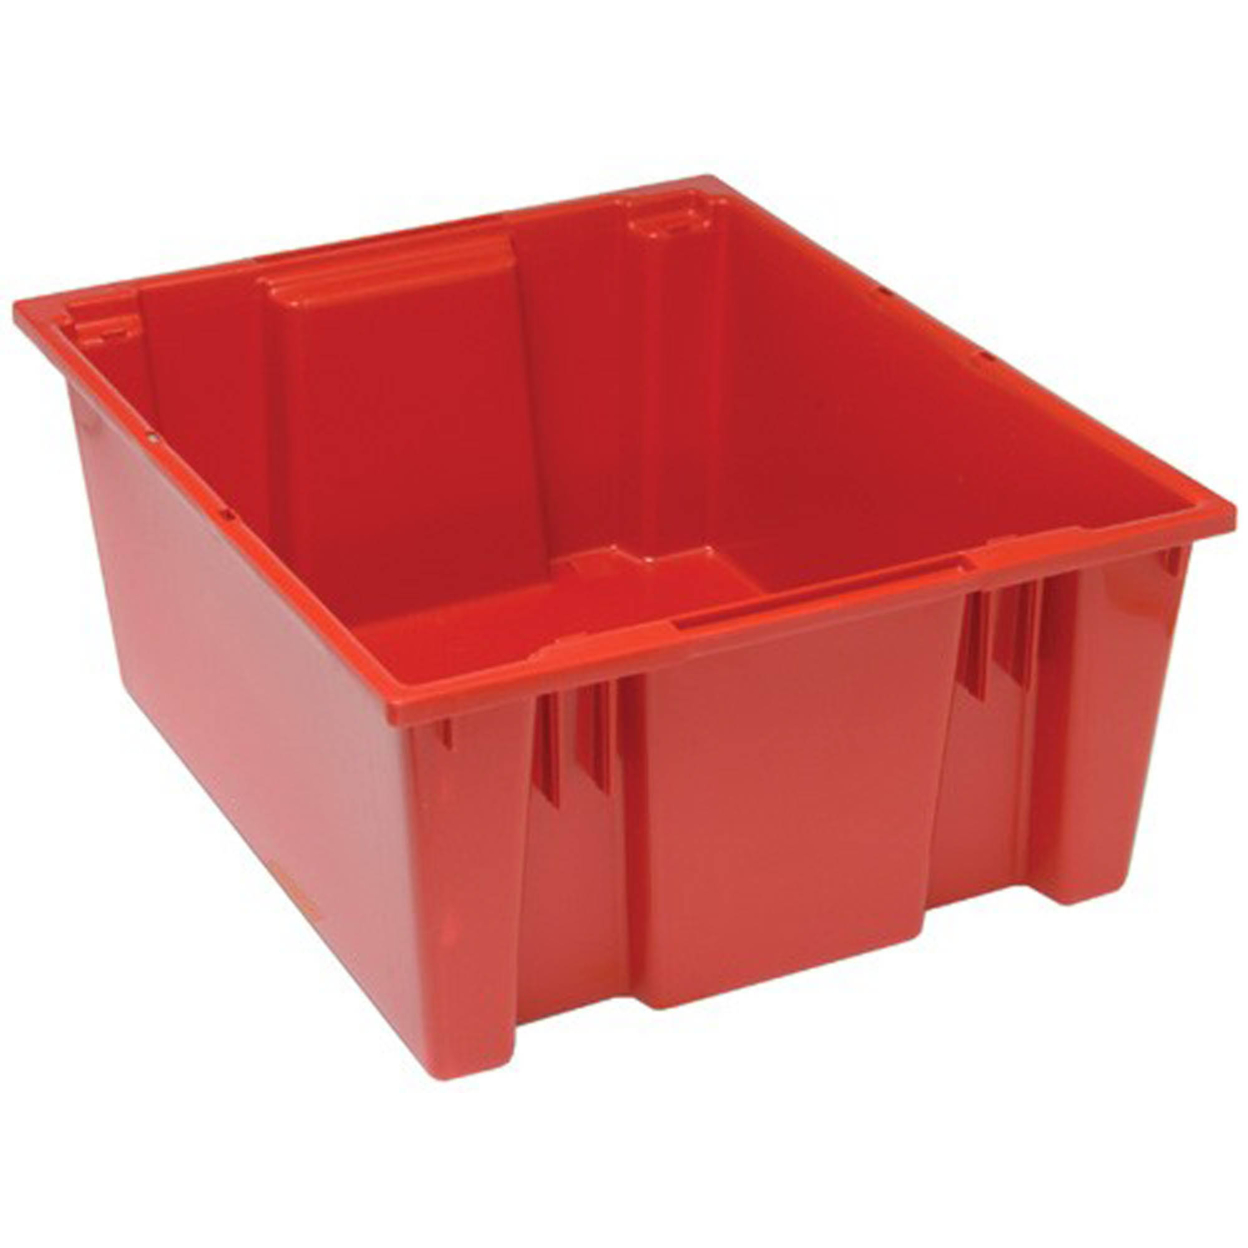 Quantum Storage Systems Stack and Nest Tote Heavy Duty Polypropylene Container, 23 1/2"W x 19 1/2"D x 10"H, 0.80 Cap (cu - image 1 of 2